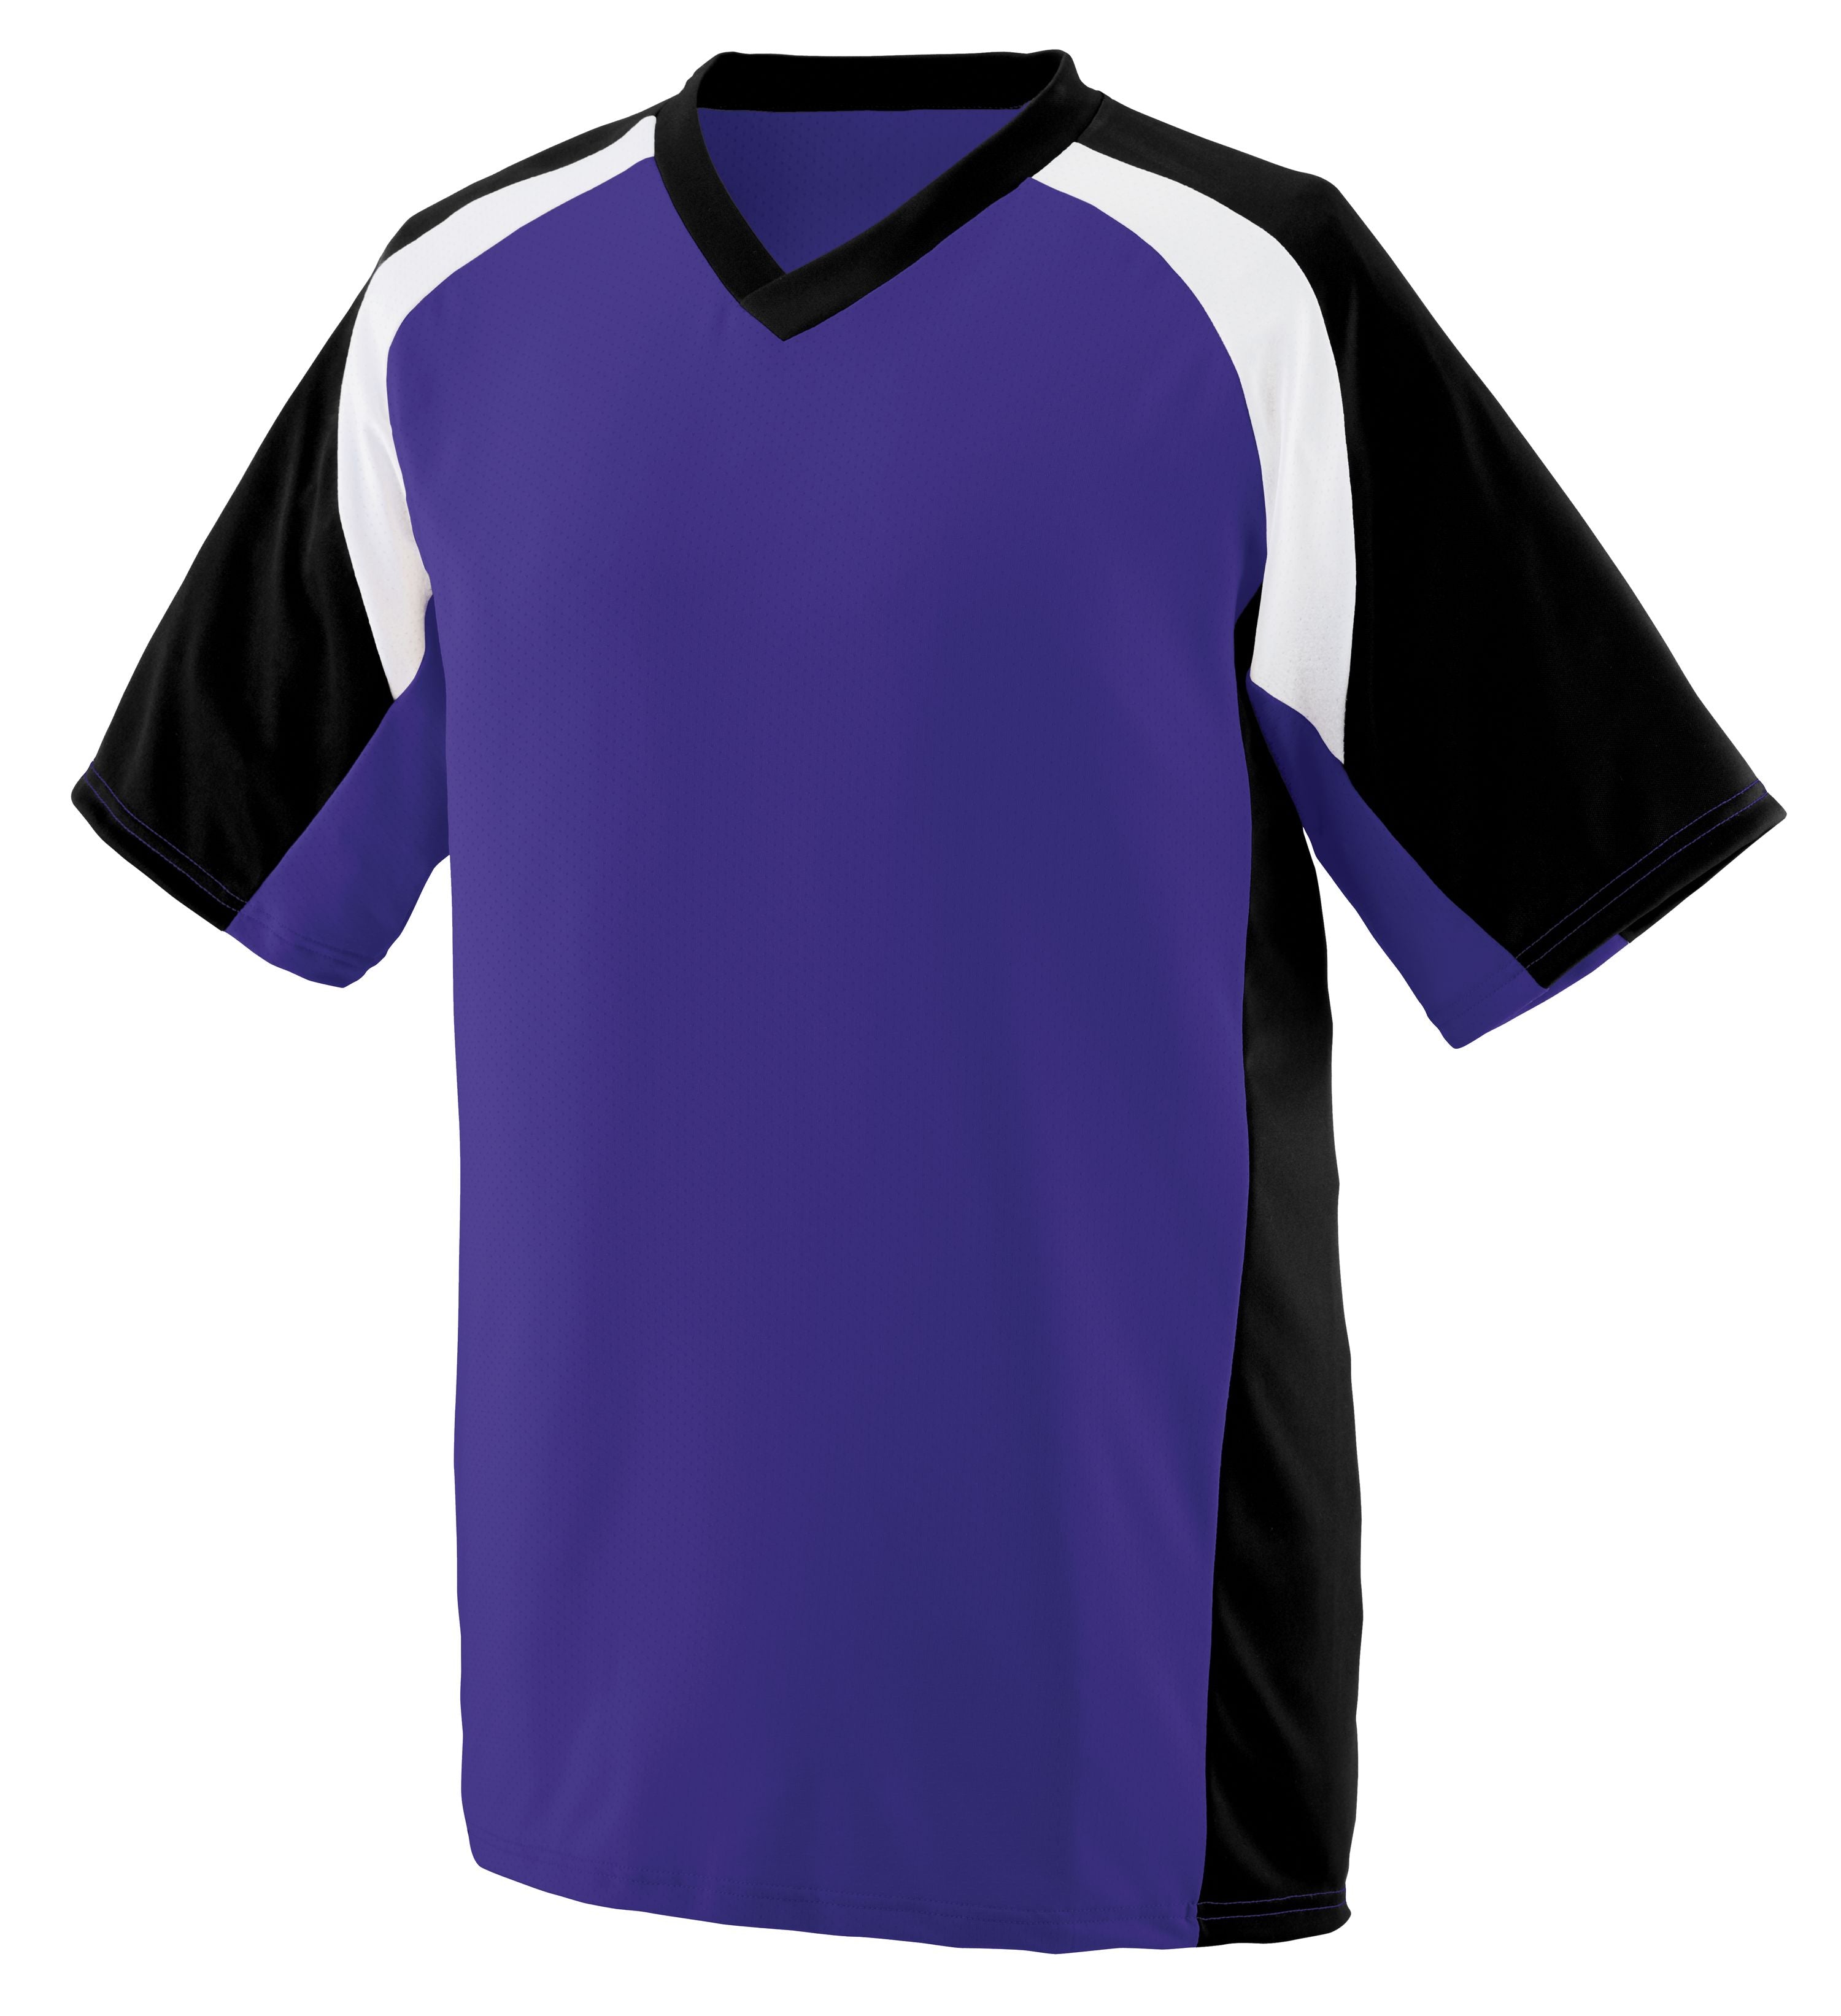 Augusta Sportswear Nitro Jersey in Purple/Black/White  -Part of the Adult, Adult-Jersey, Augusta-Products, Football, Shirts, All-Sports, All-Sports-1 product lines at KanaleyCreations.com